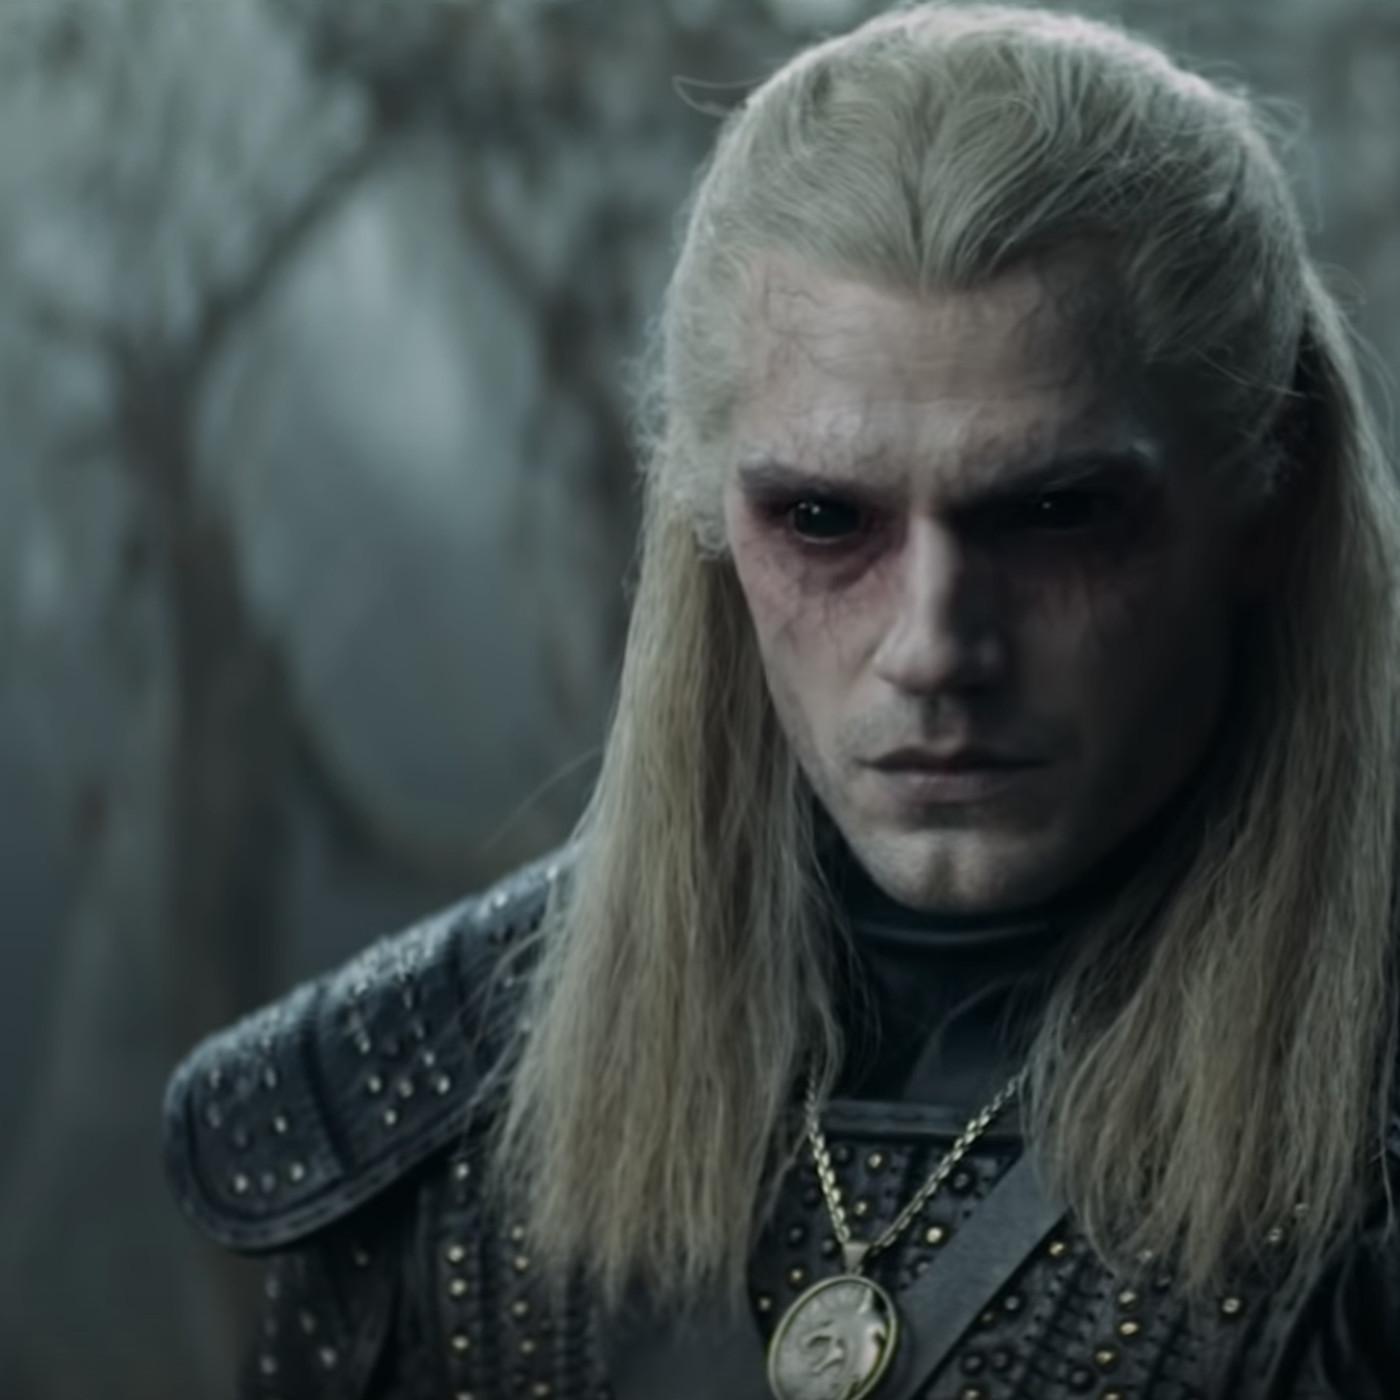 The Witcher's first trailer brings Henry Cavill's Geralt to life